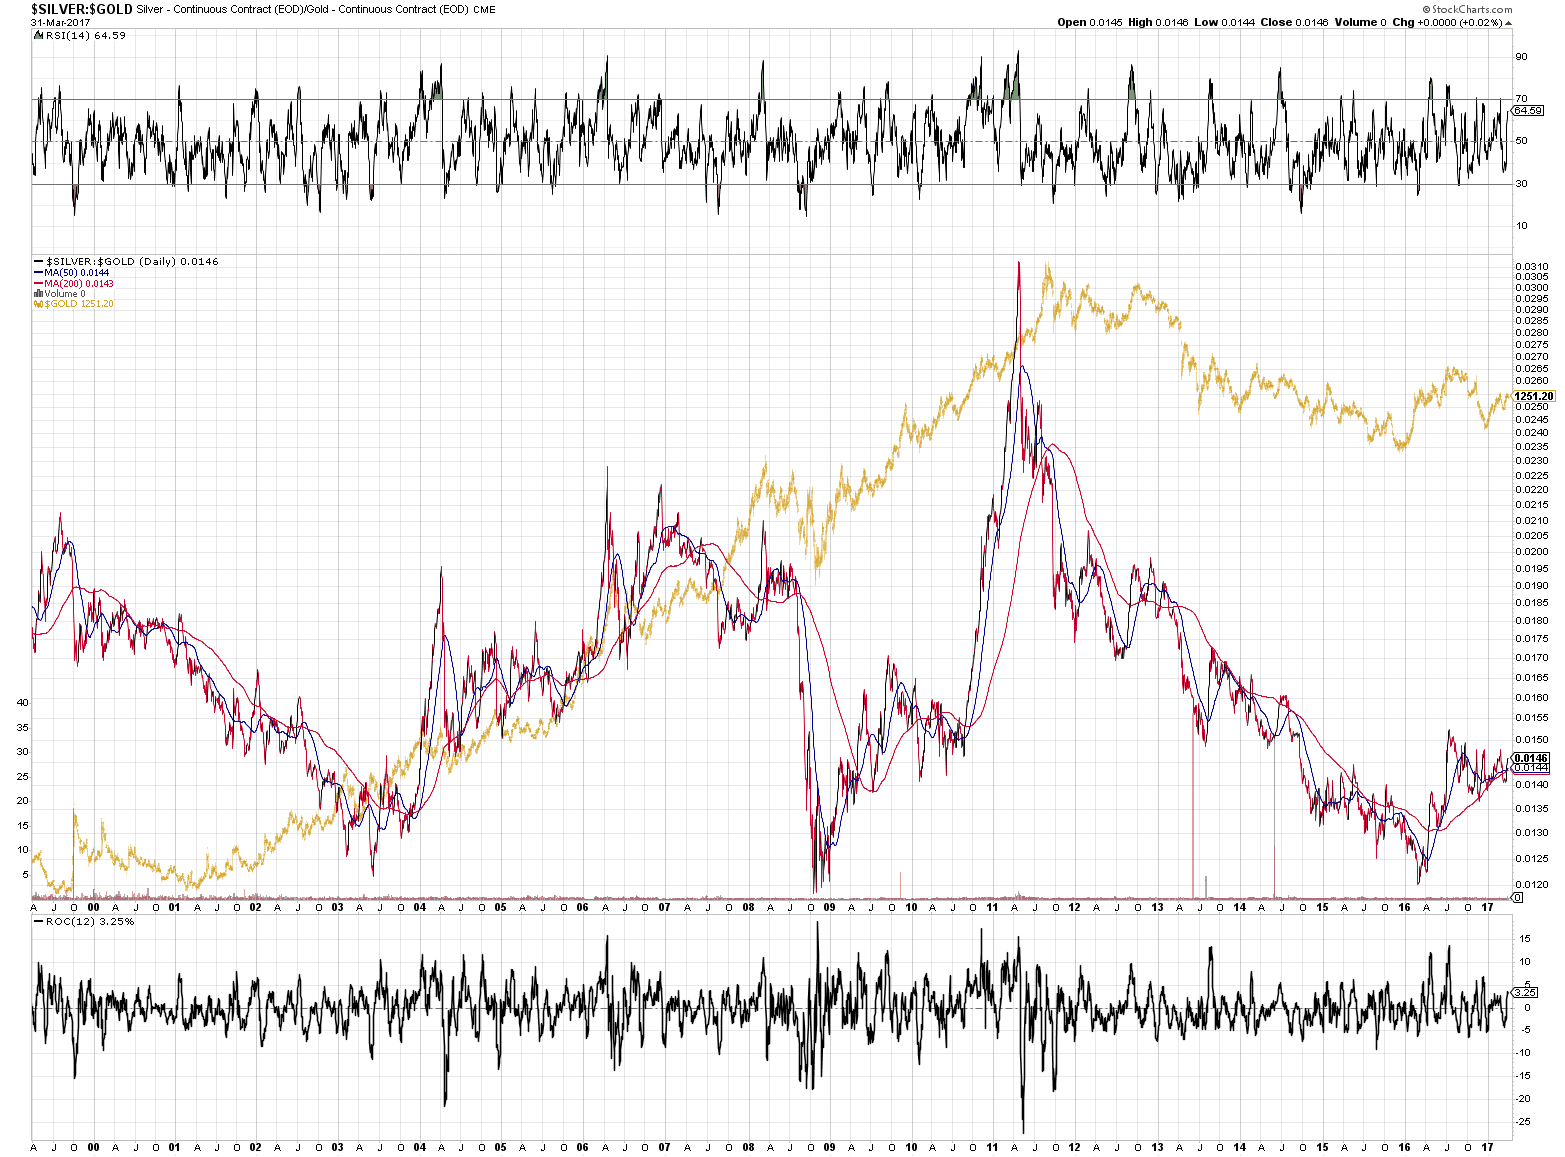 SILVER:GOLD - Silver to Gold ratio chart